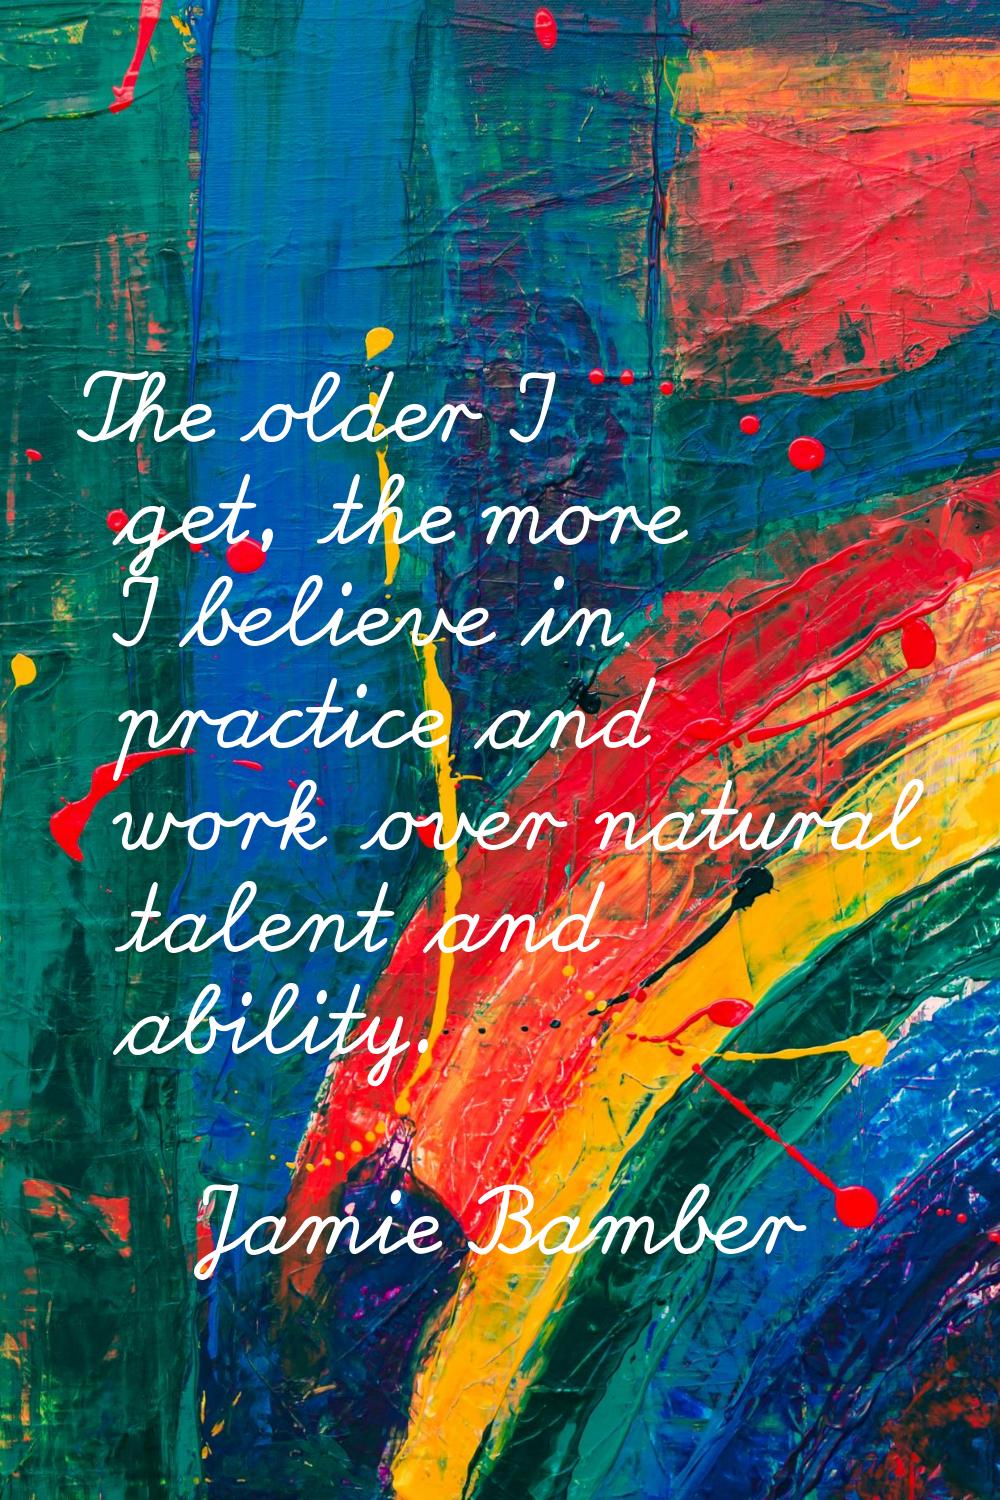 The older I get, the more I believe in practice and work over natural talent and ability.